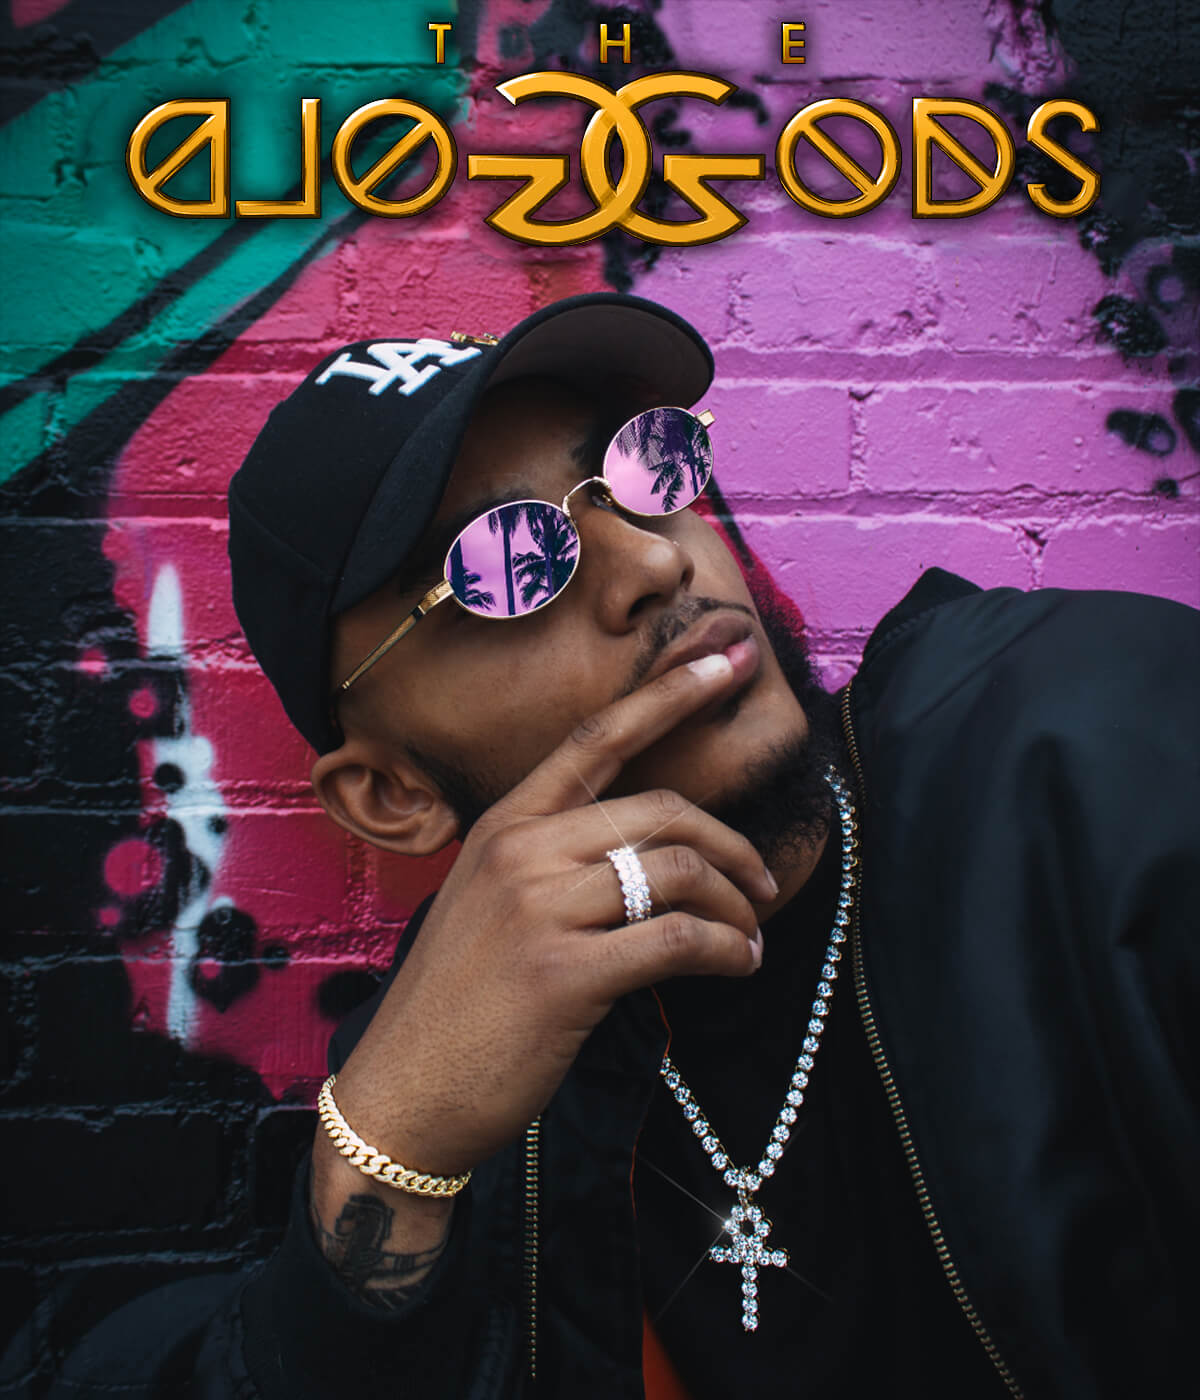 NEW JEWELRY AND SHADES FROM THE GOLD GODS - SHOP NOW